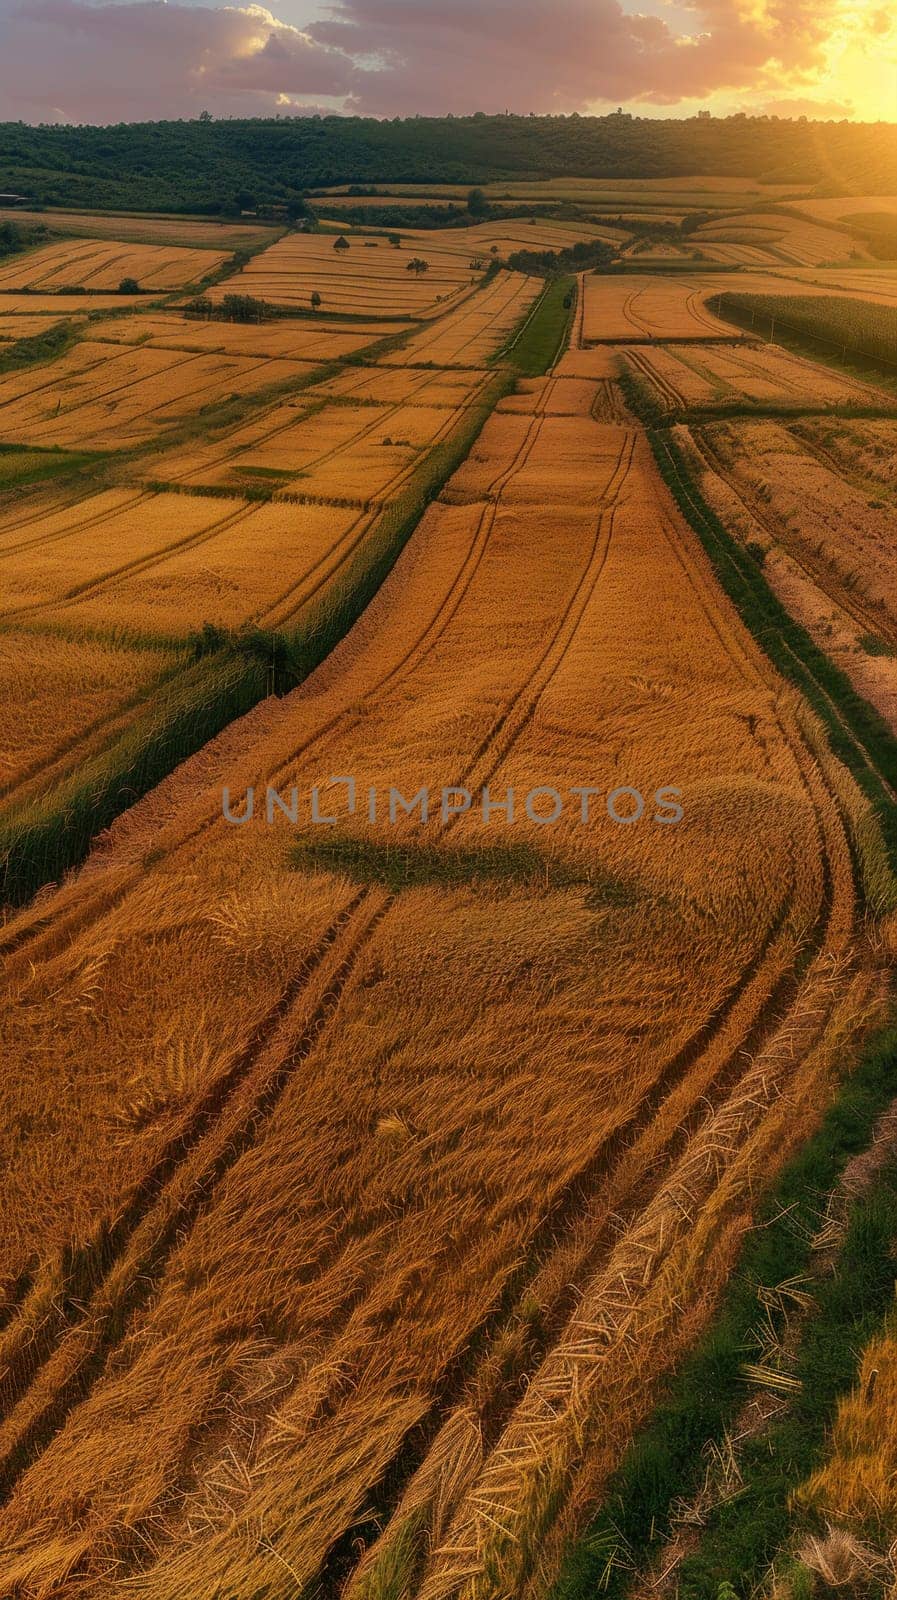 A golden sunset over a lush wheat field in the countryside, nature and agriculture concept